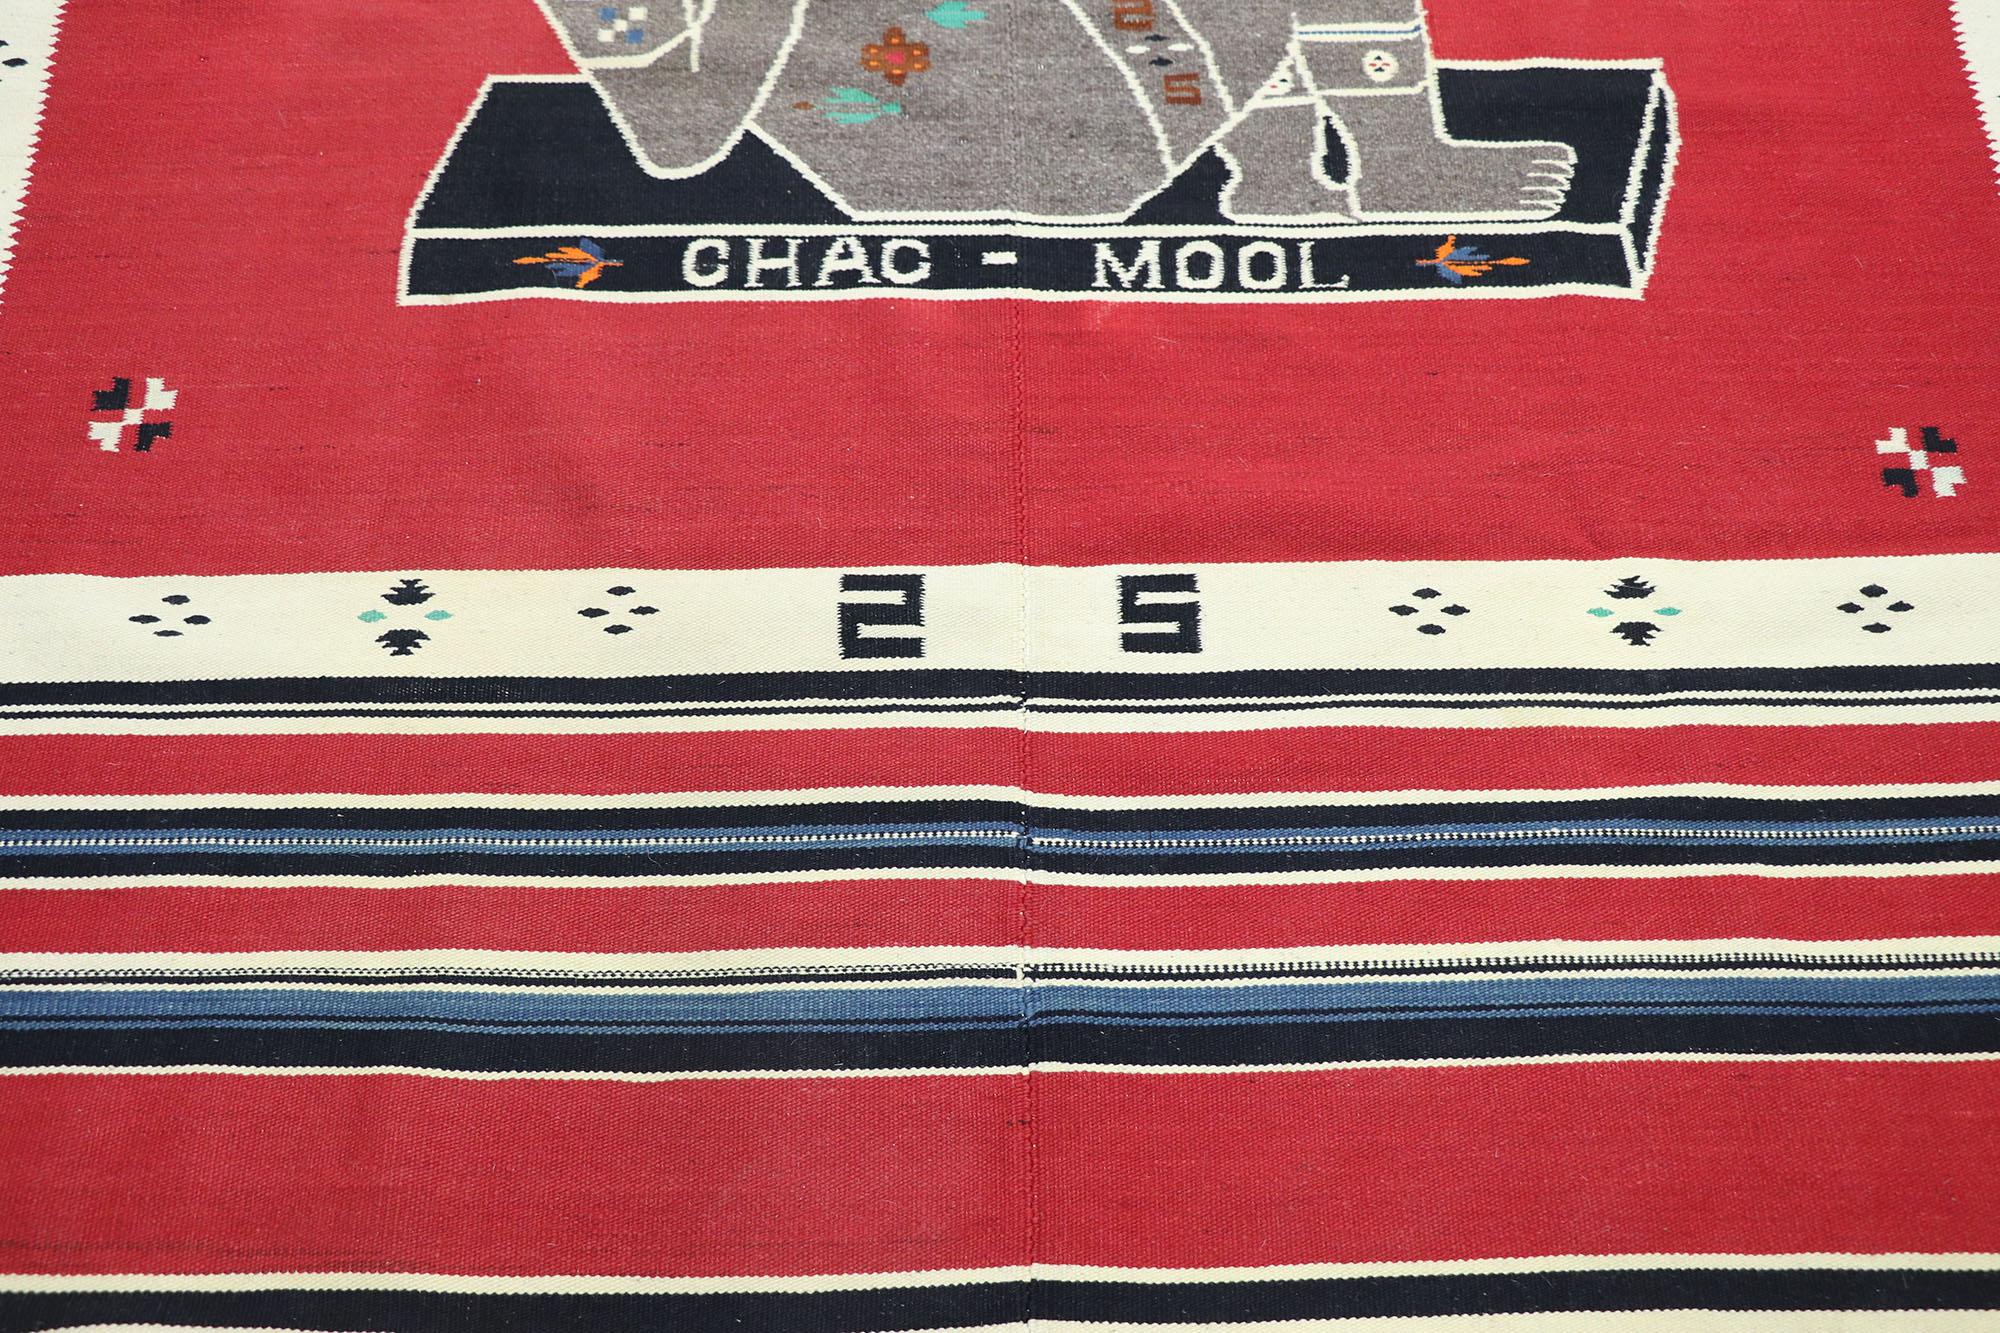 Hand-Woven Vintage Mexican Chac Mool Kilim Rug with Aztec Style